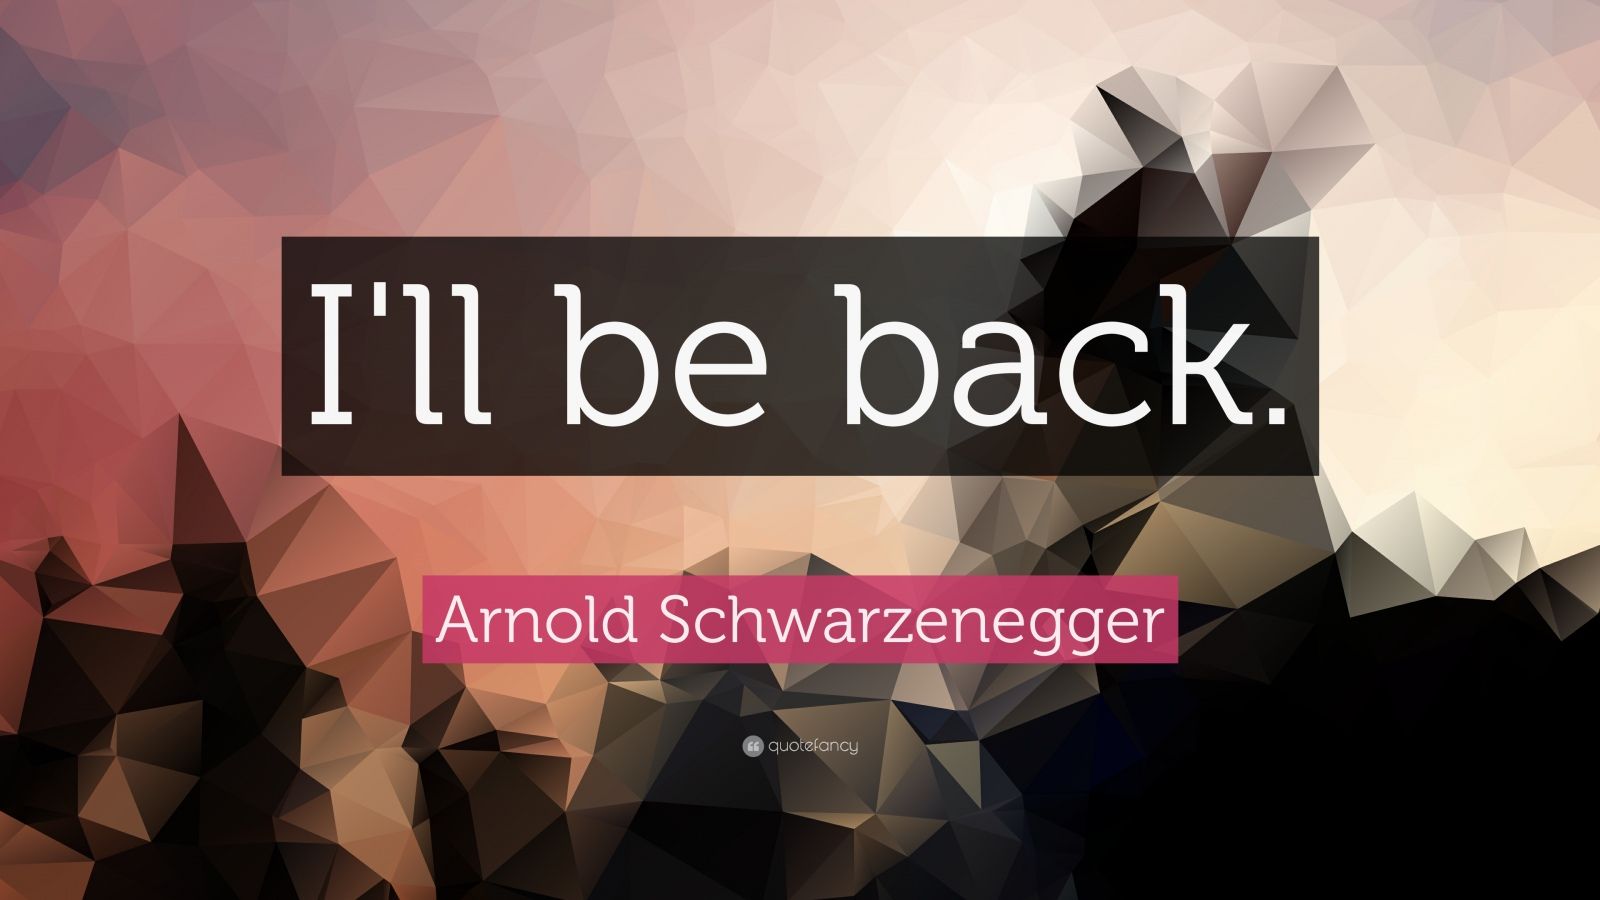 Arnold Schwarzenegger Quote: “I'll be back.” (19 wallpapers) - Quotefancy